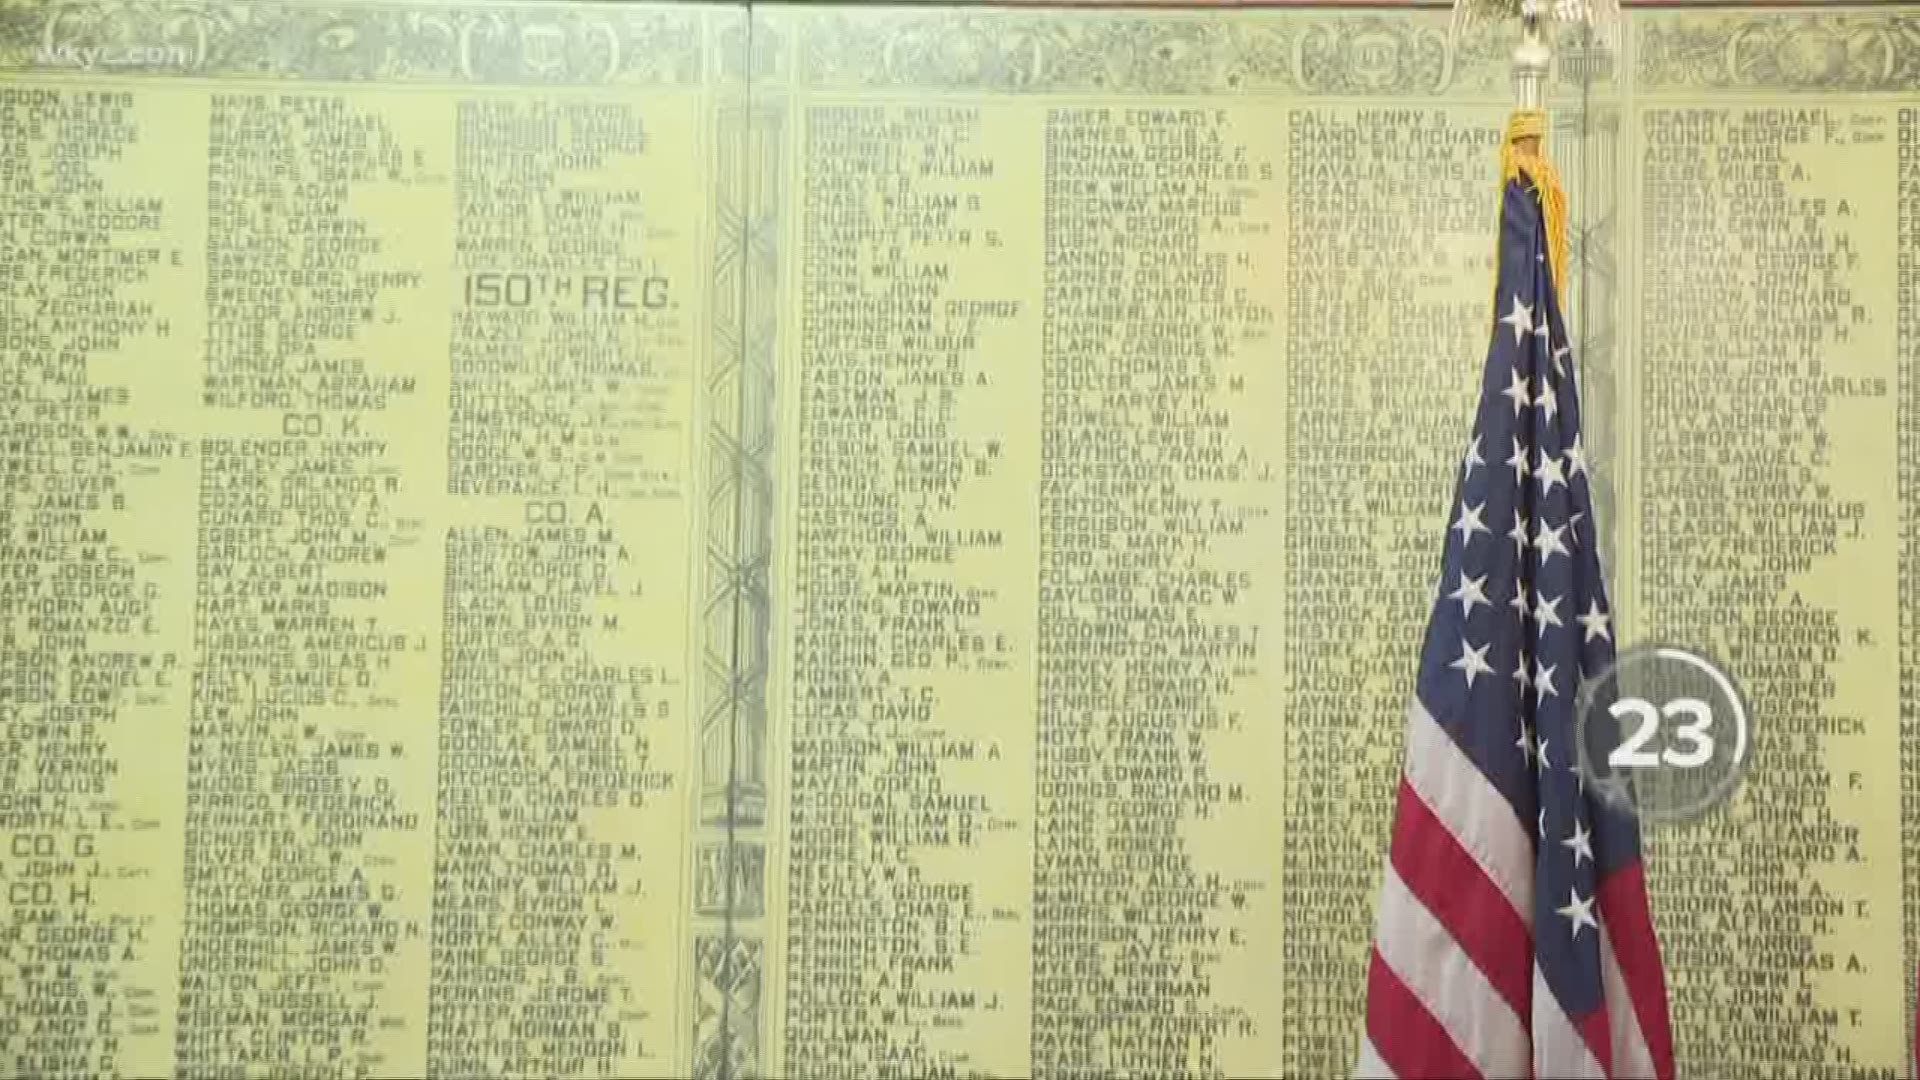 107 names were added to the Cuyahoga County Soldiers’ and Sailors’ Monument during a ceremony Wednesday morning, joining the 9,000 already enshrined at the downtown Cleveland landmark.